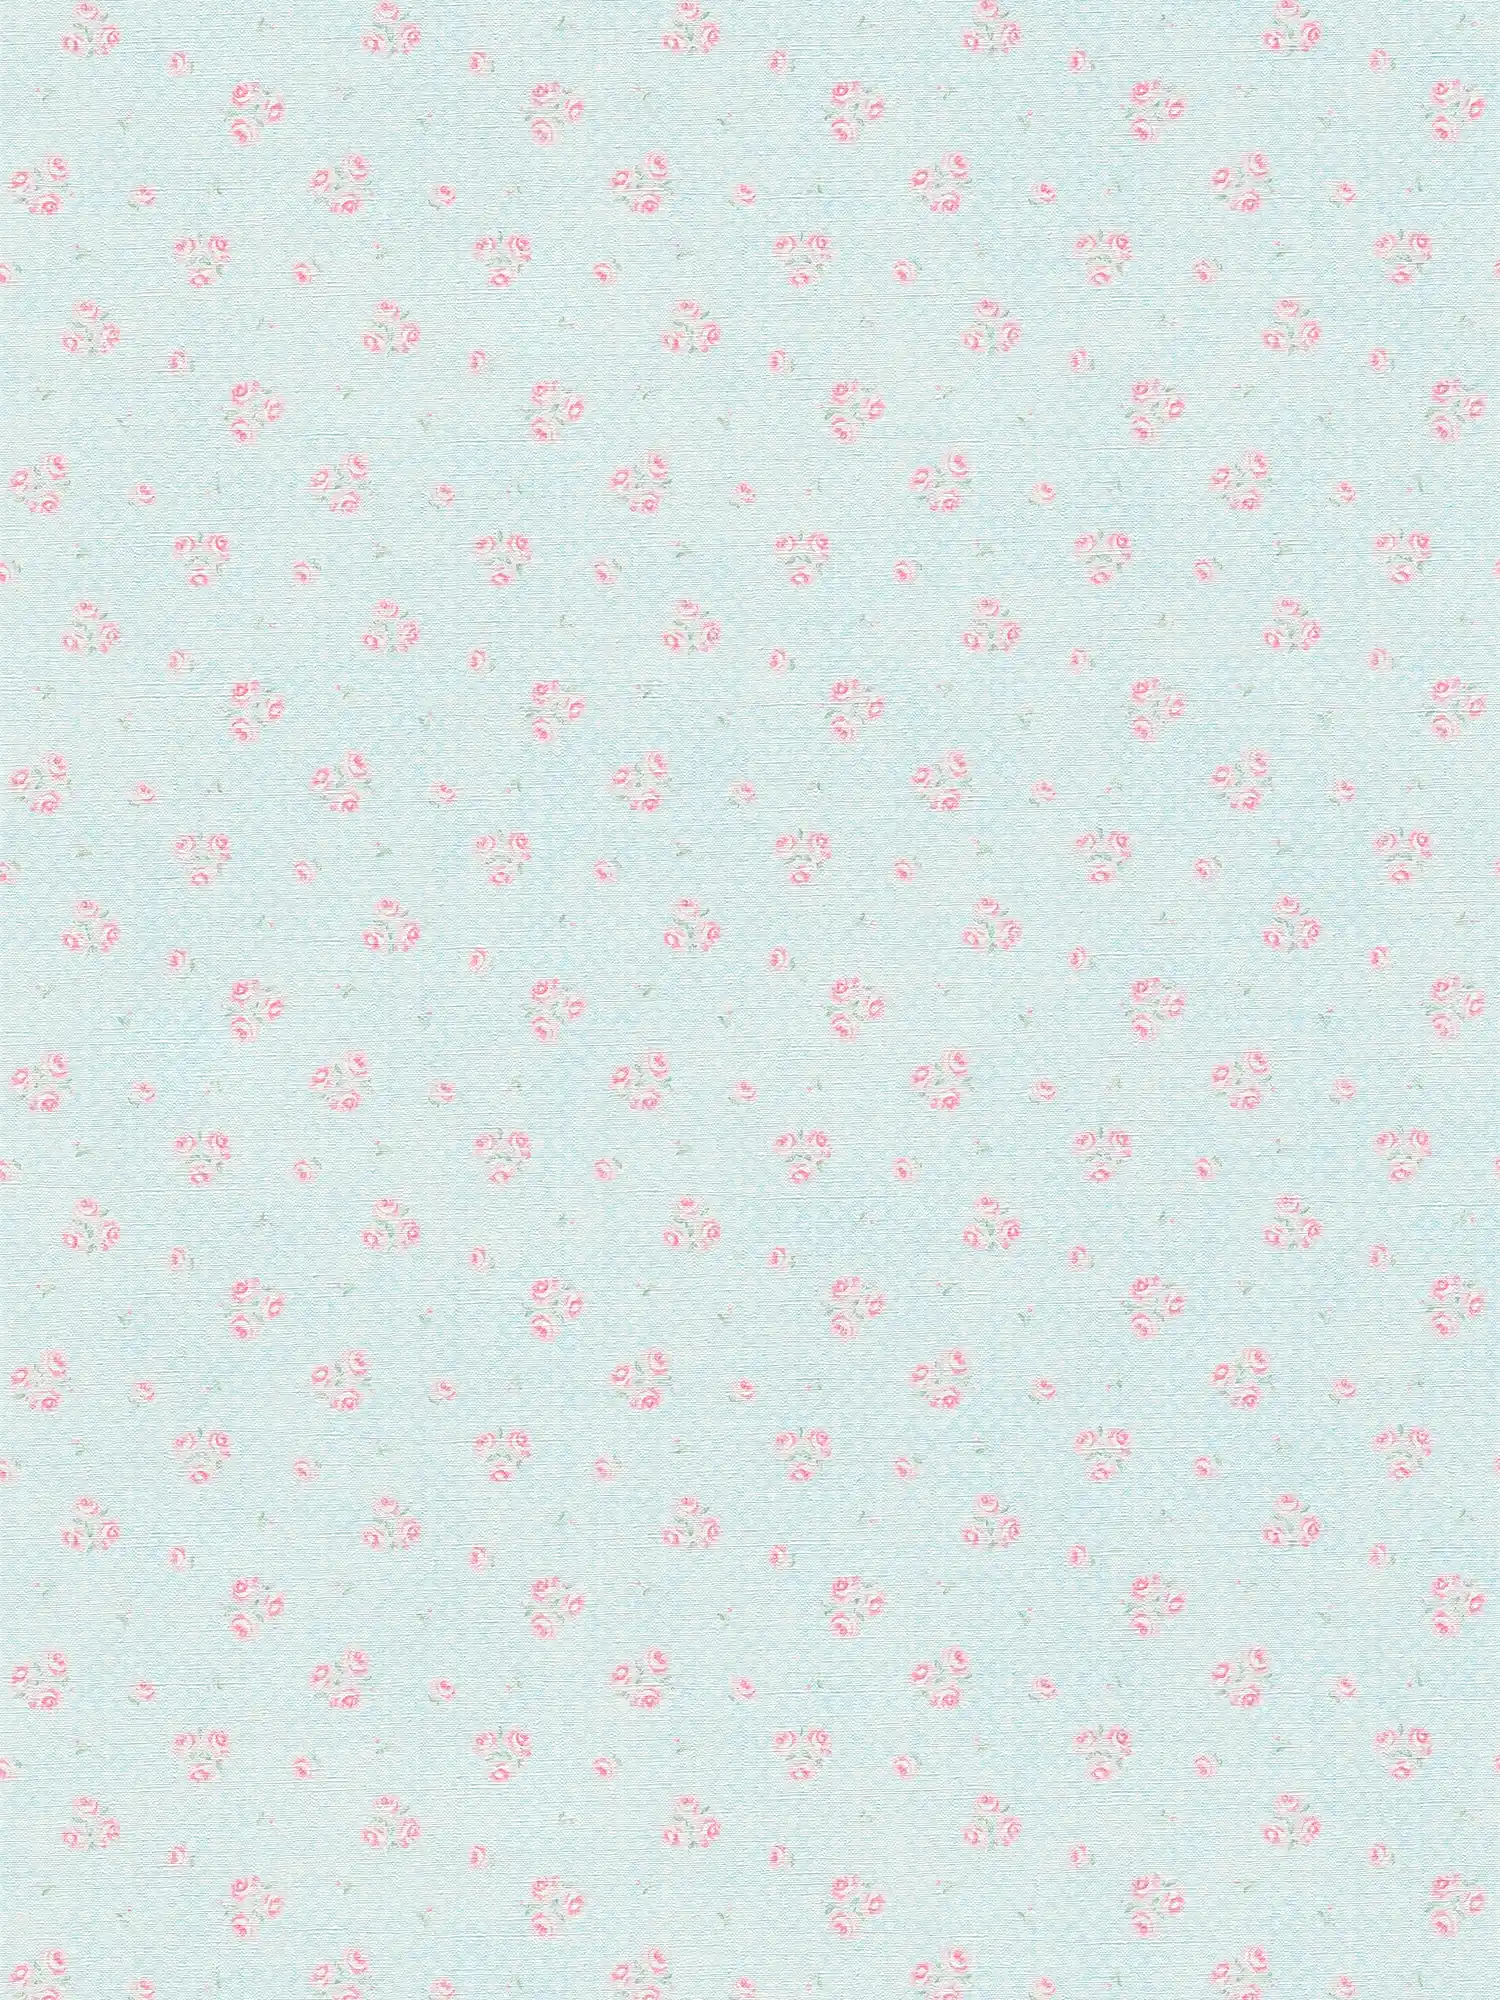 Shabby Chic style floral wallpaper - blue, pink, white
